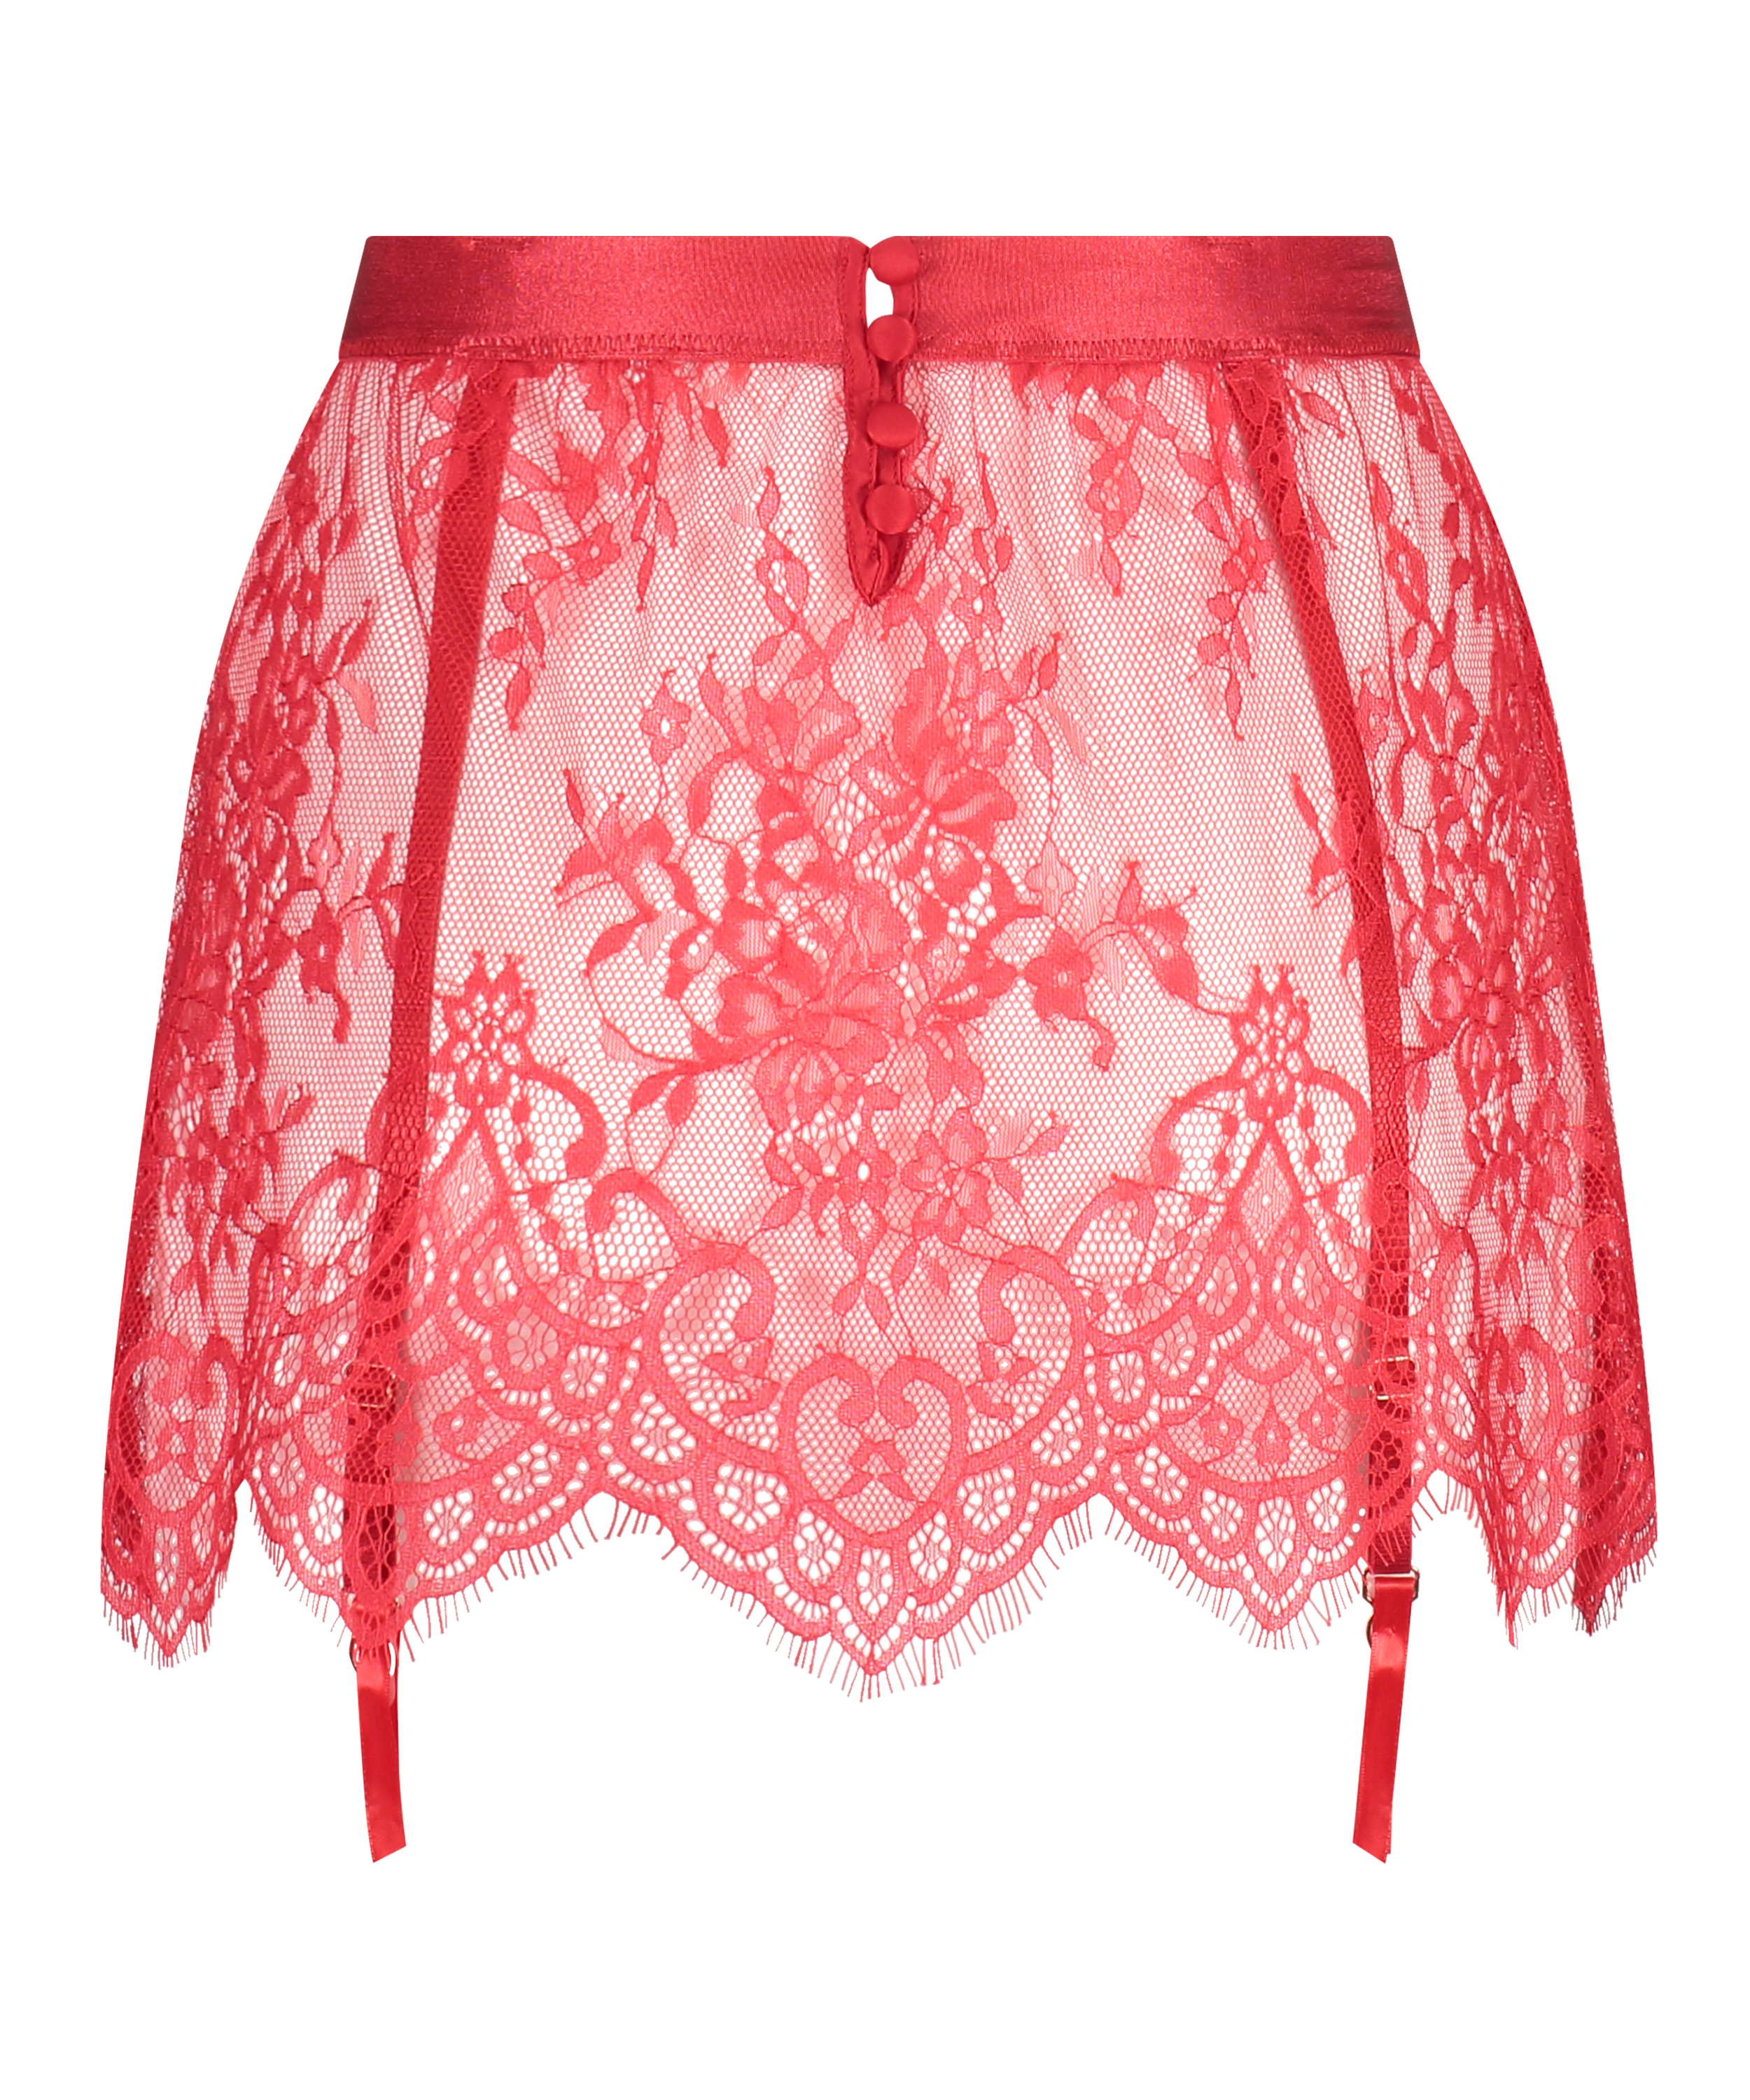 Rok Lace, Rood, main